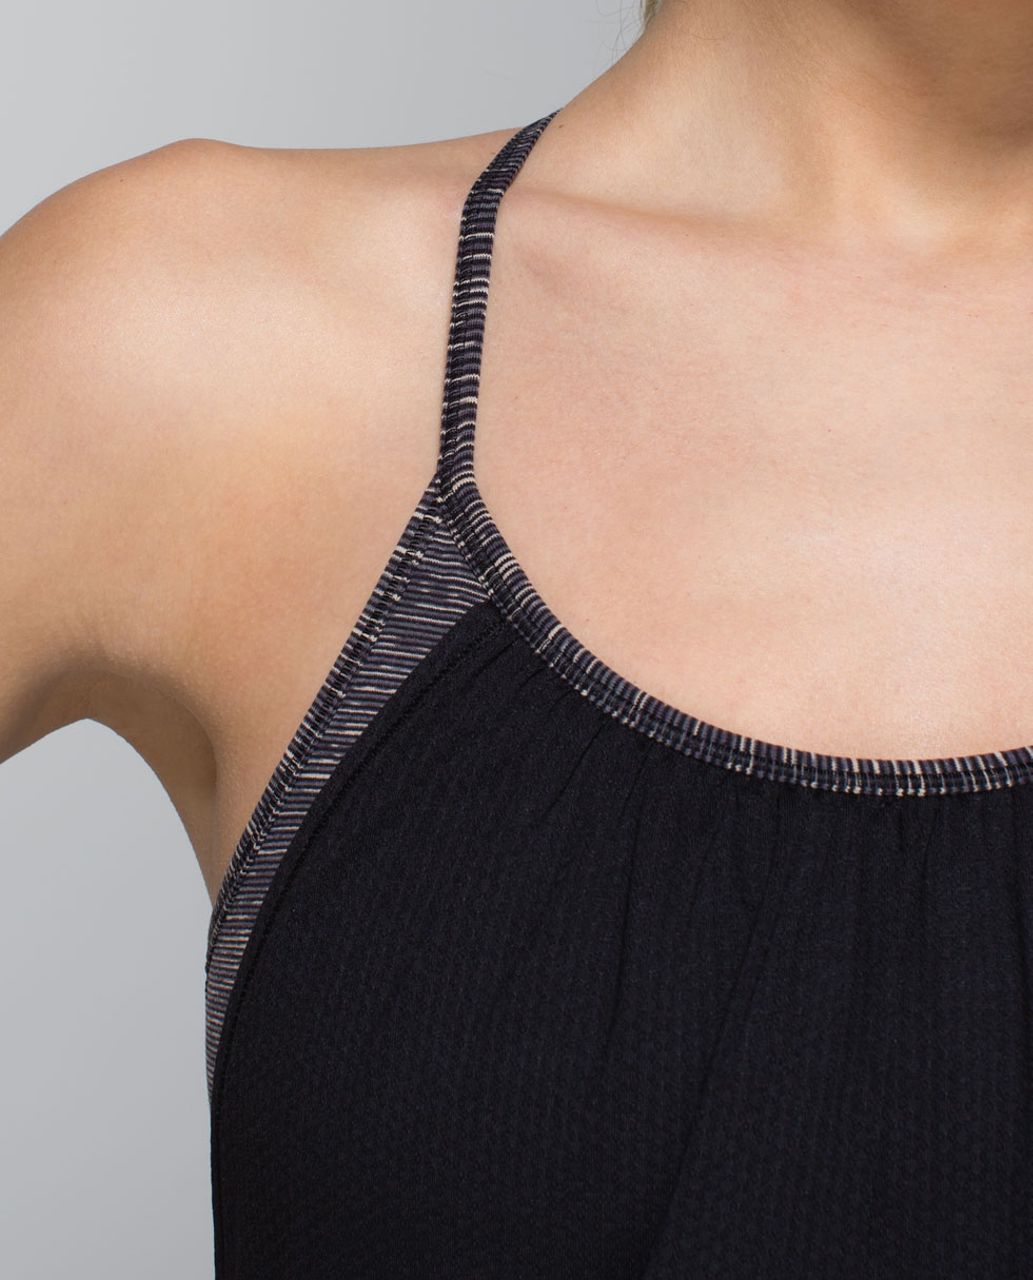 Lululemon No Limits Tank - Black / Wee Are From Space Black Cashew